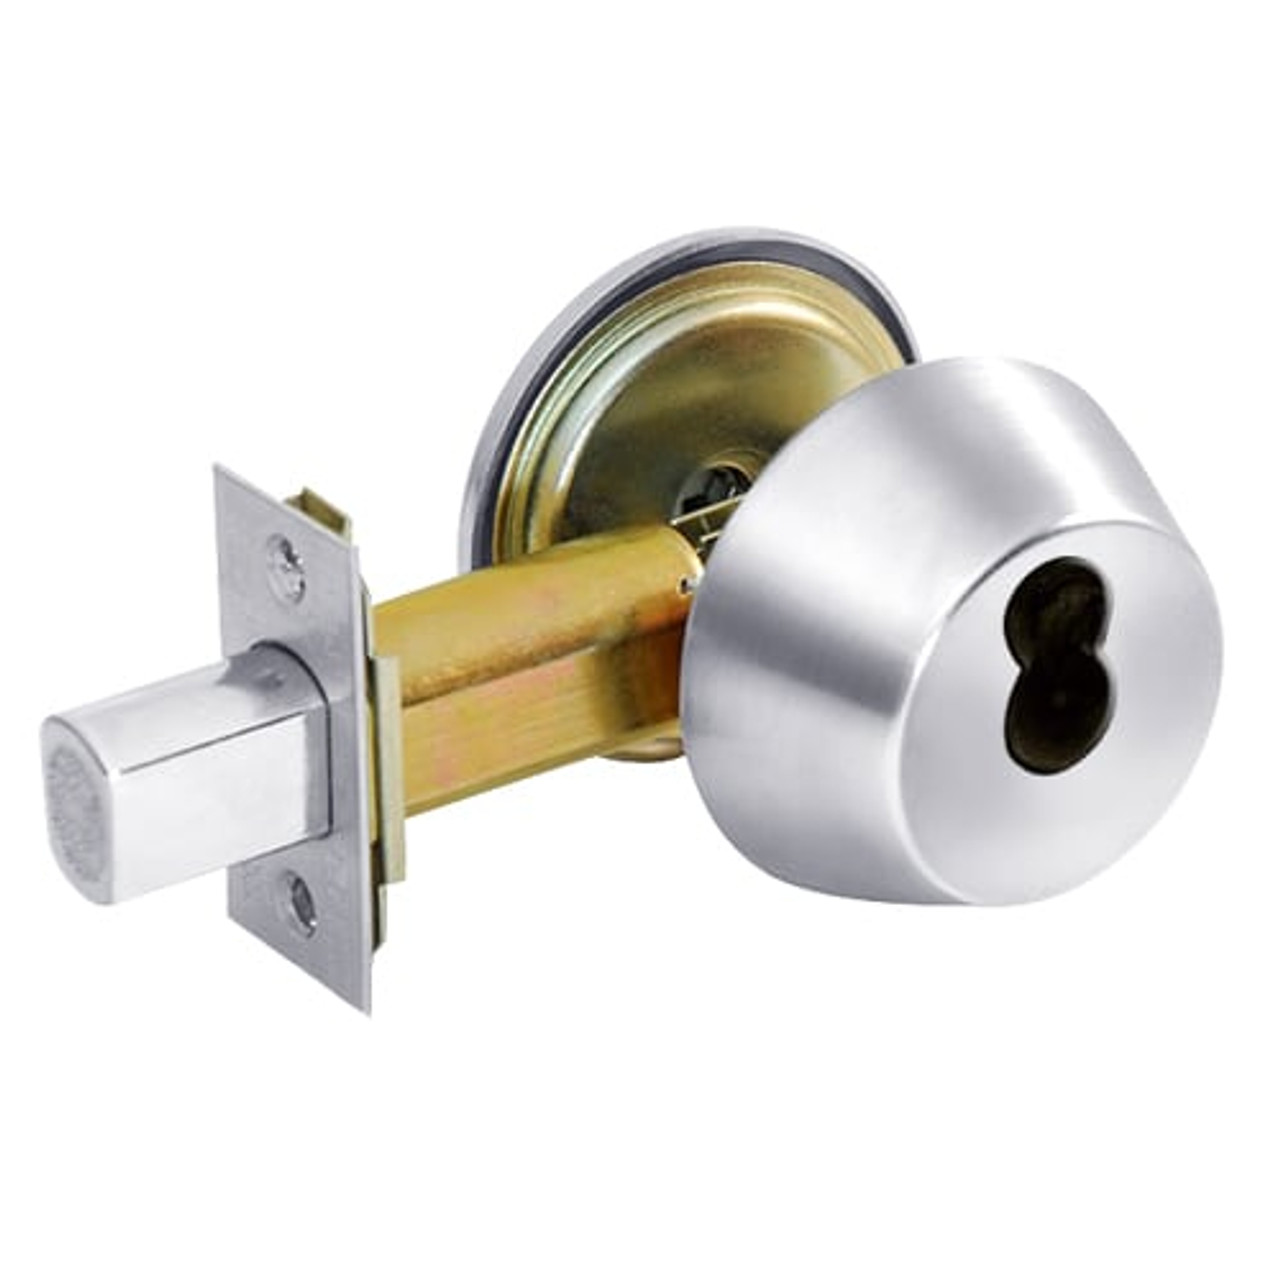 DL3217-625-CL6 Corbin DL3200 Series Classroom Cylindrical Deadlocks with Single Cylinder in Bright Chrome Finish